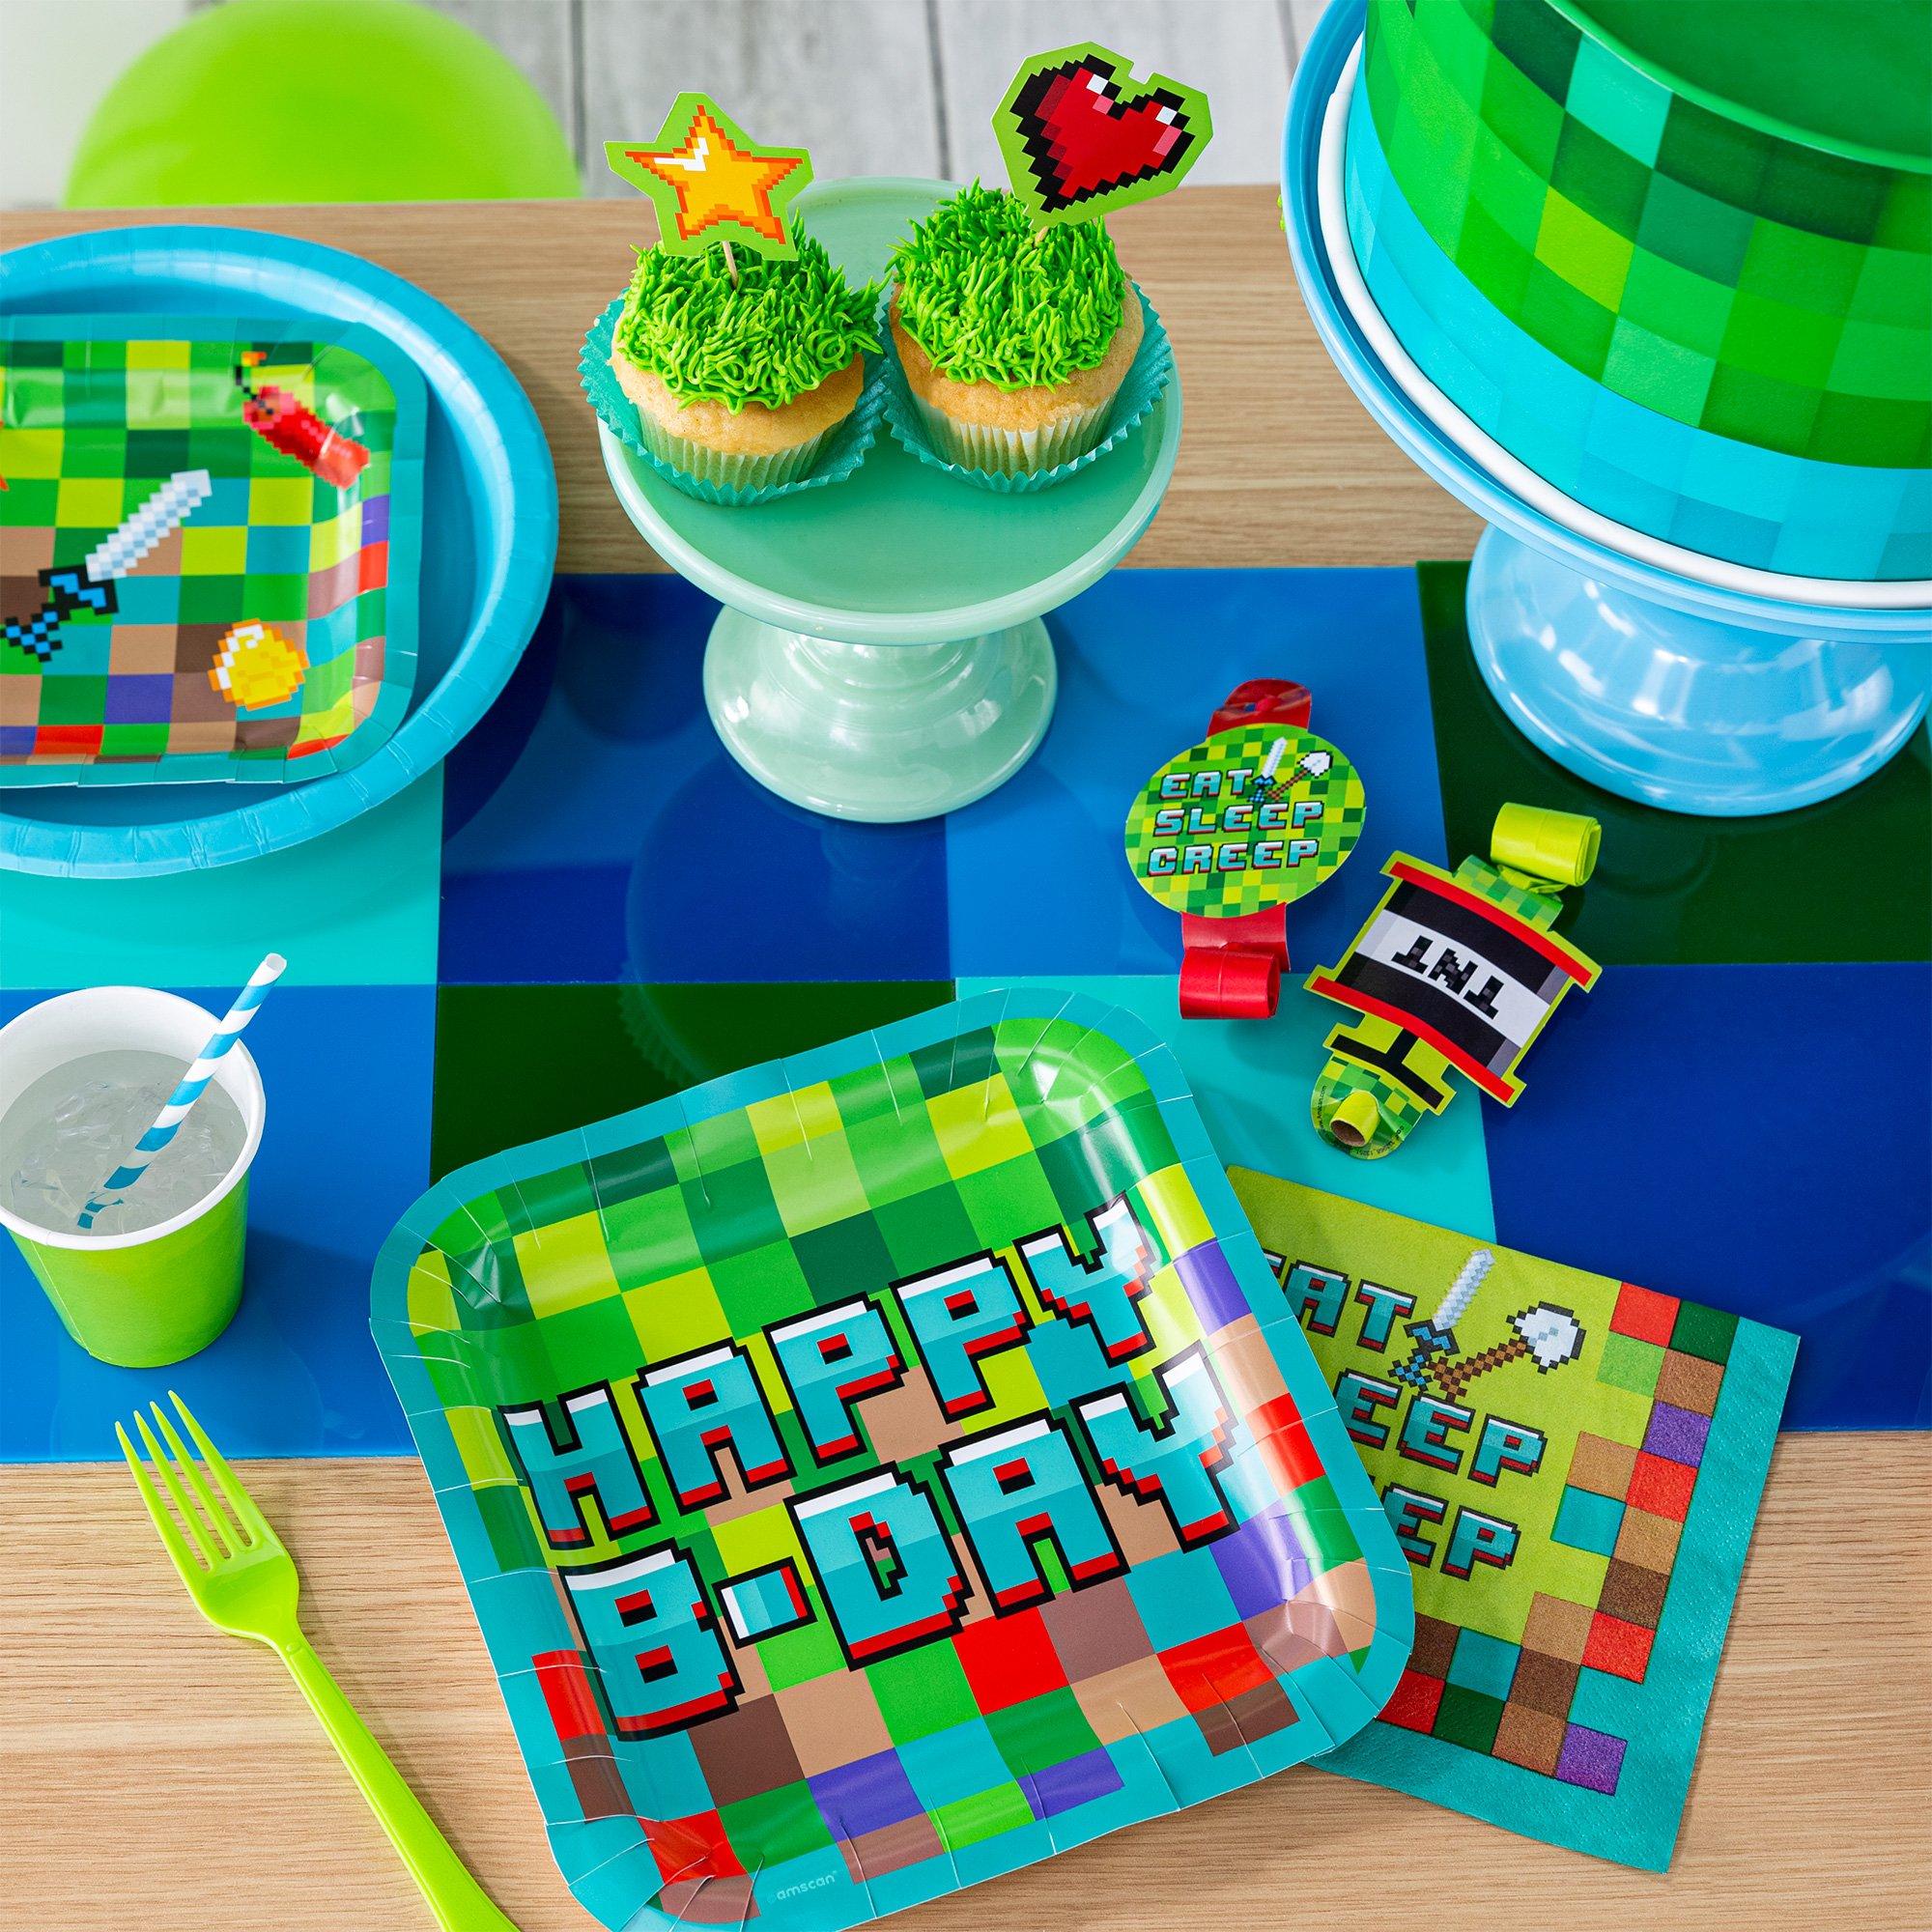 Pixelated Party Supplies